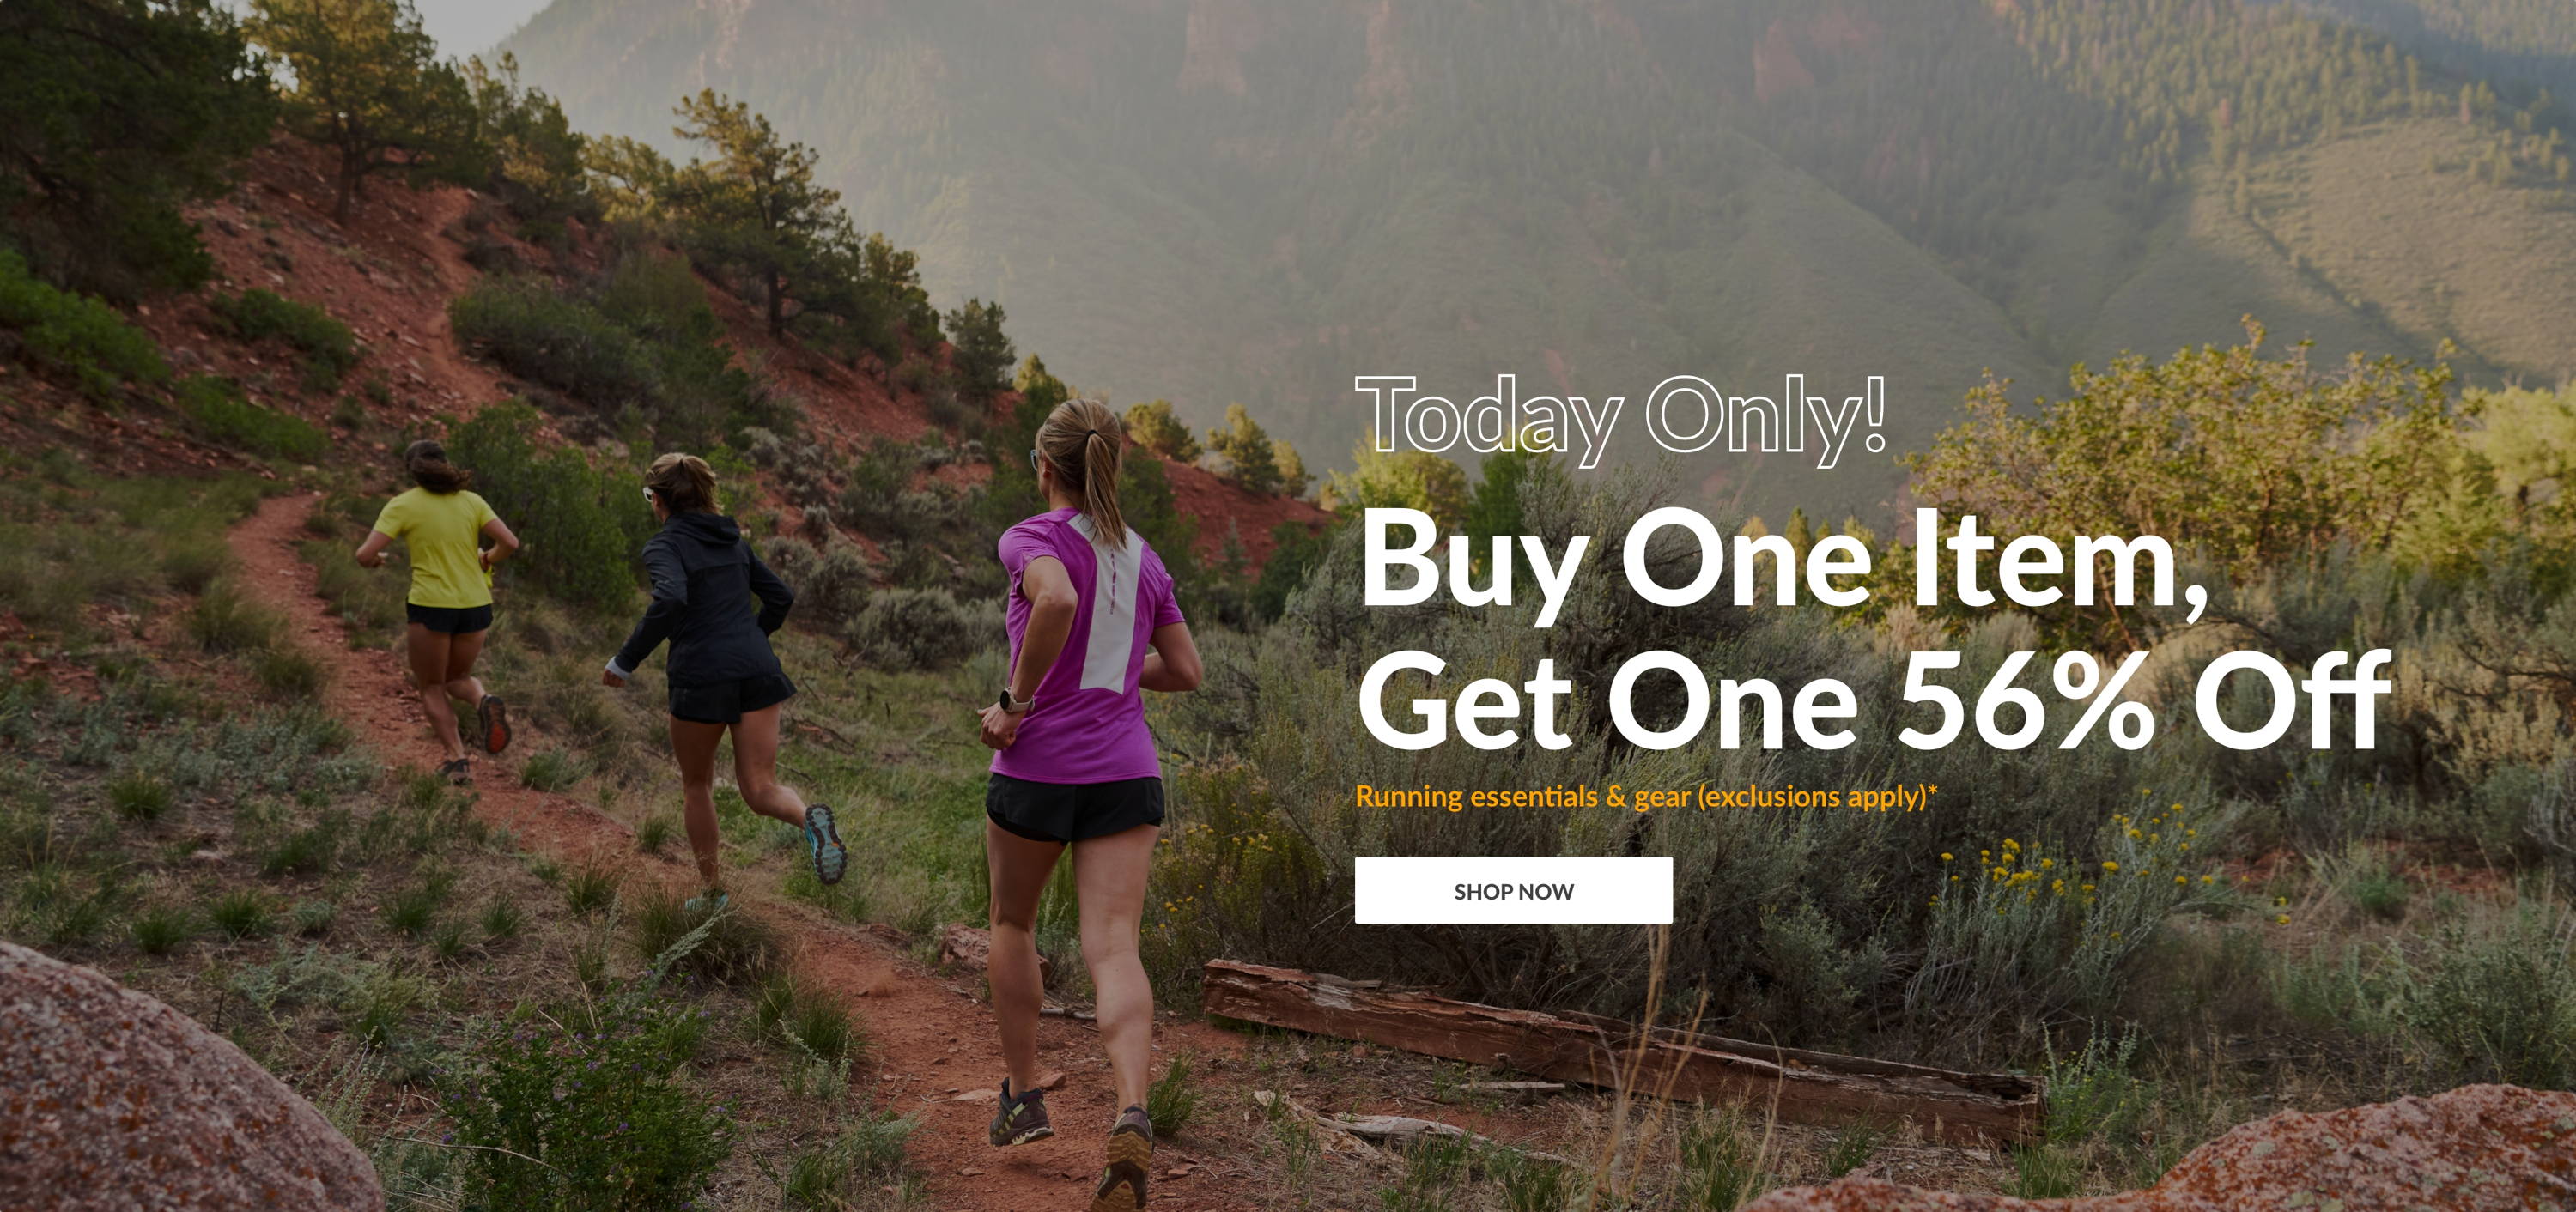 Today Only! Buy One Item, Get One 56% Off Running essentials & gear (exclusions apply)* SHOP NOW